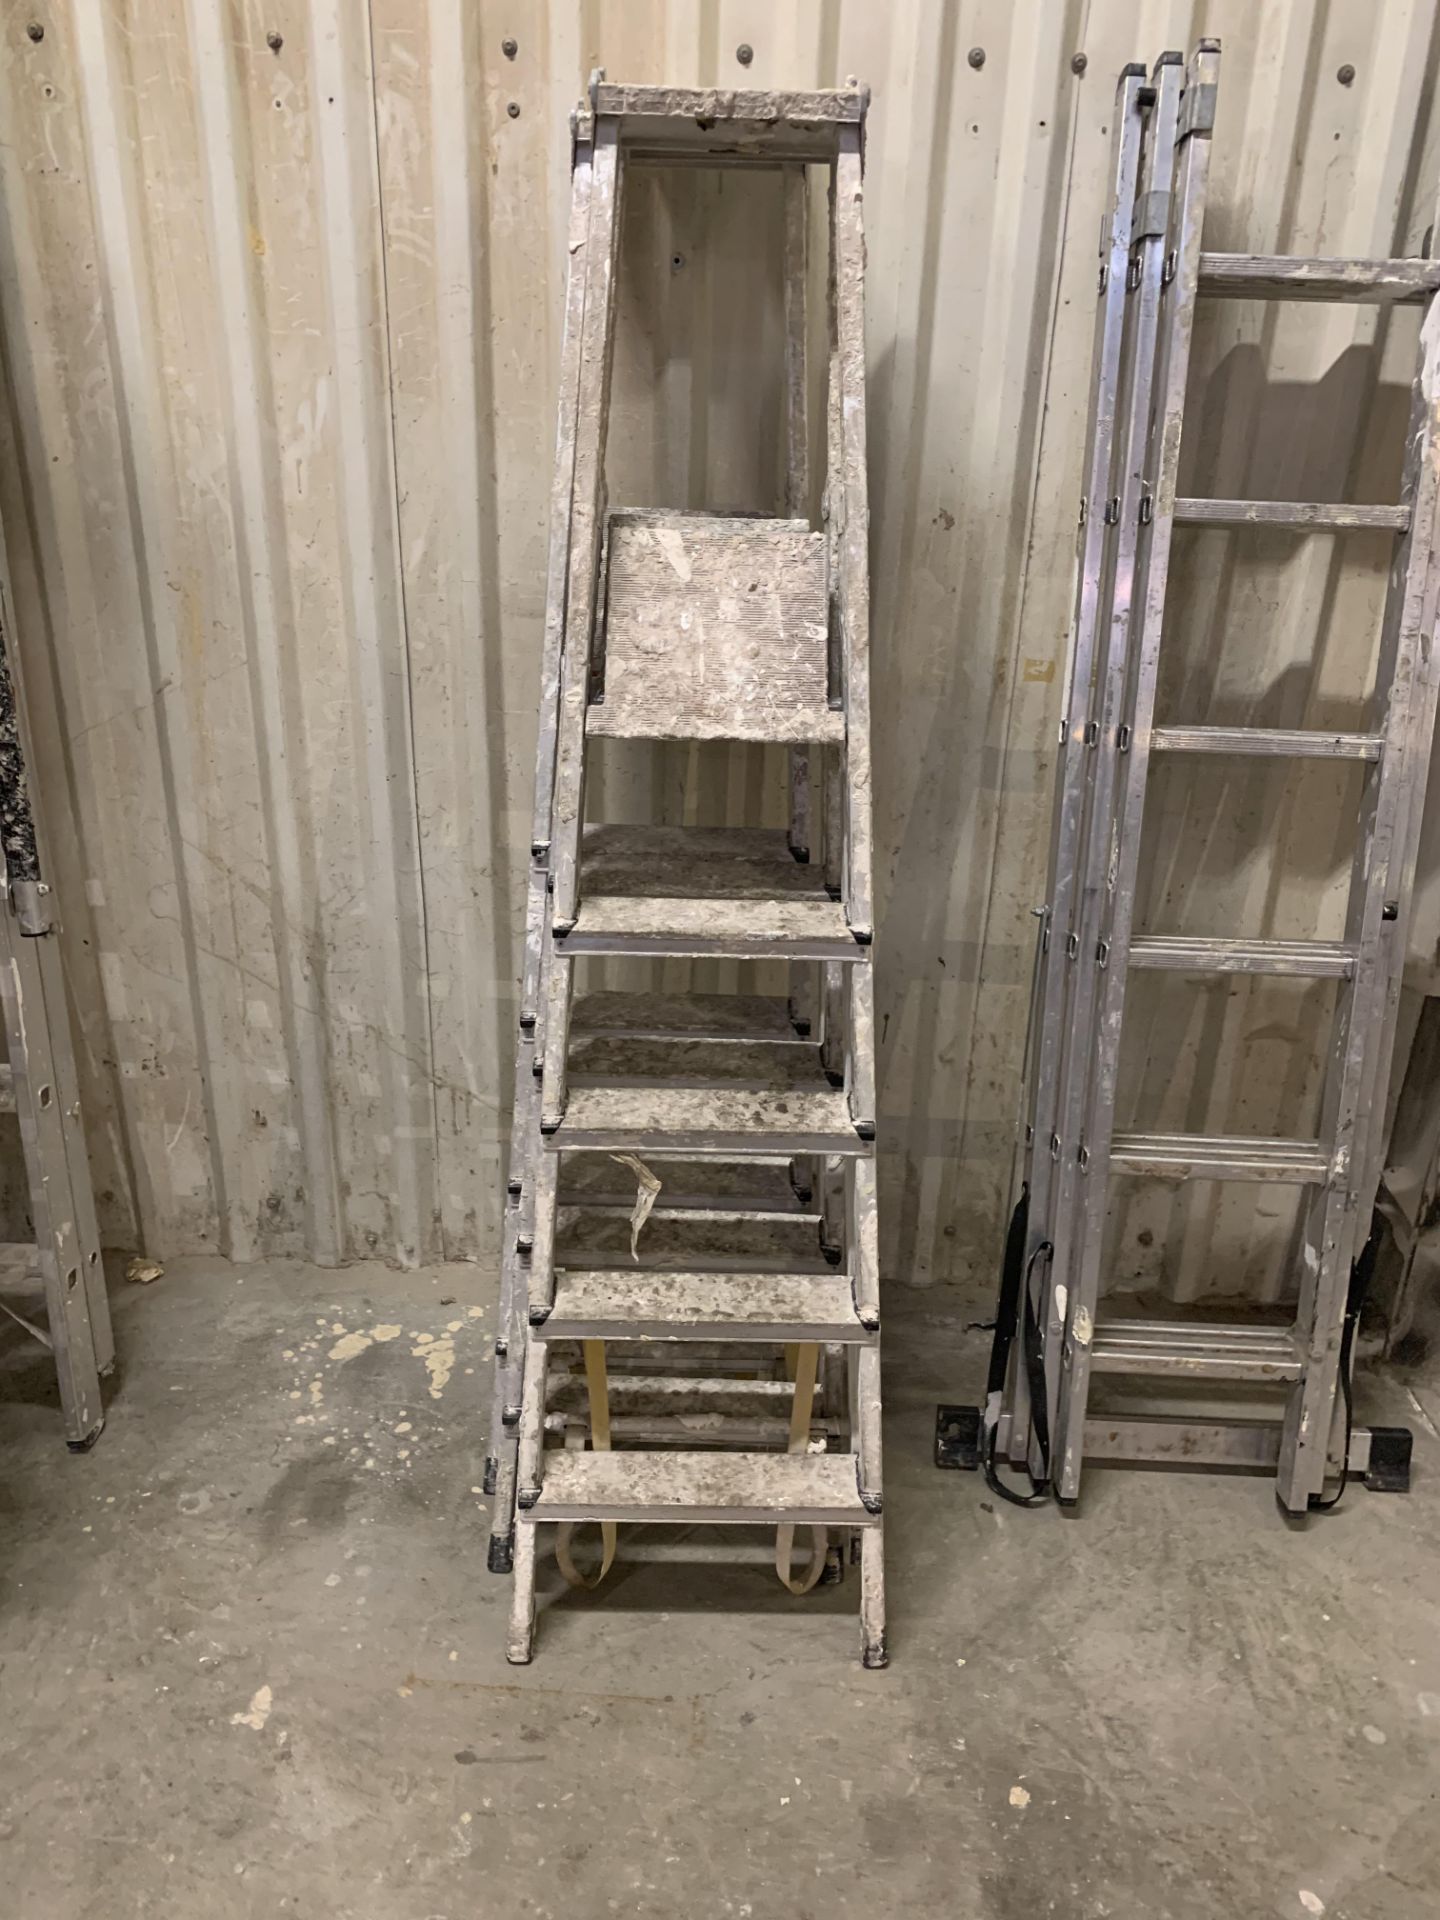 3 x Zarges 4 rung step ladders